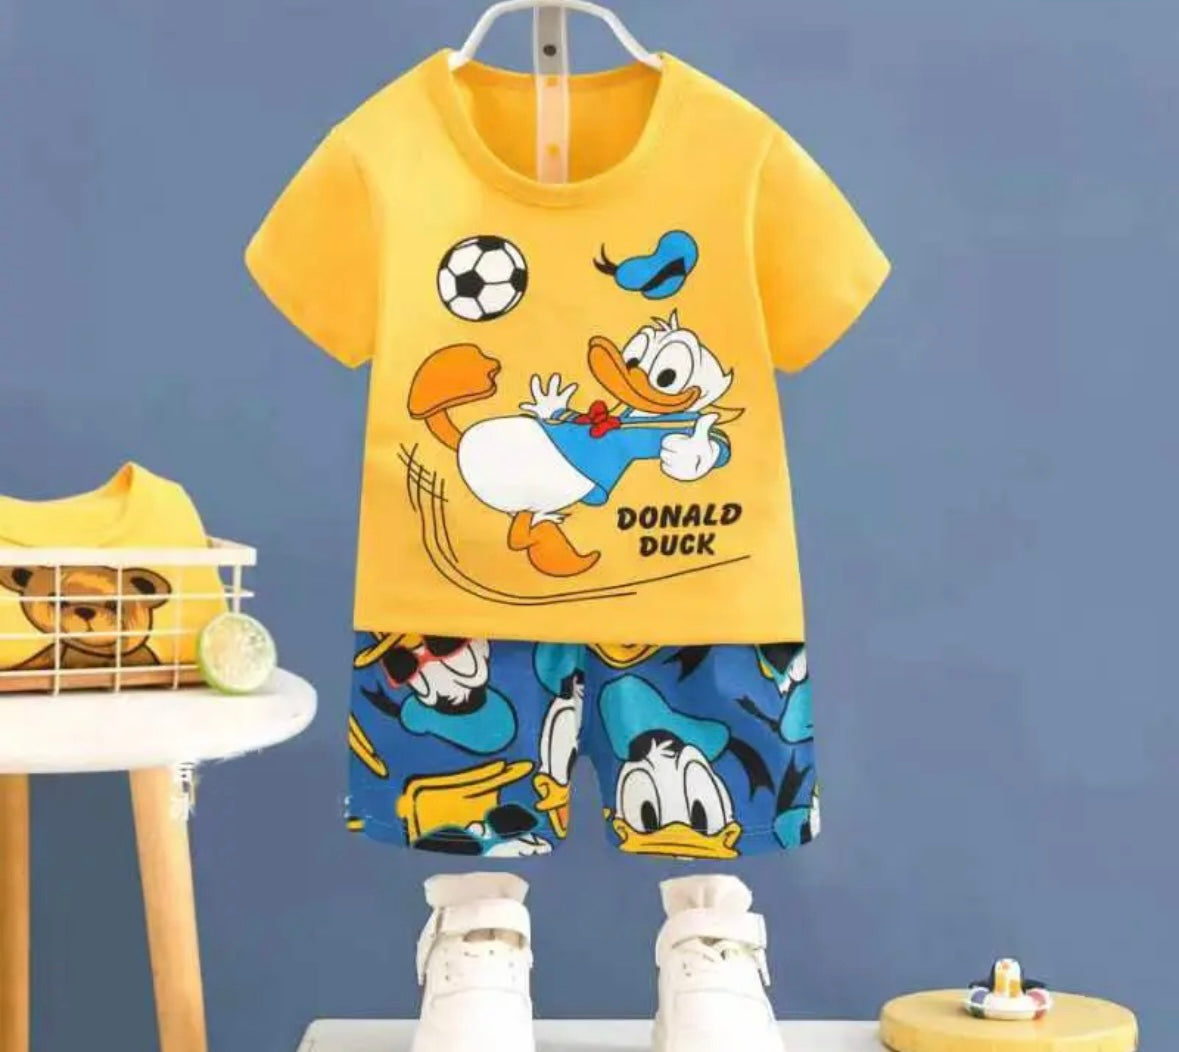 Donald Duck outfit